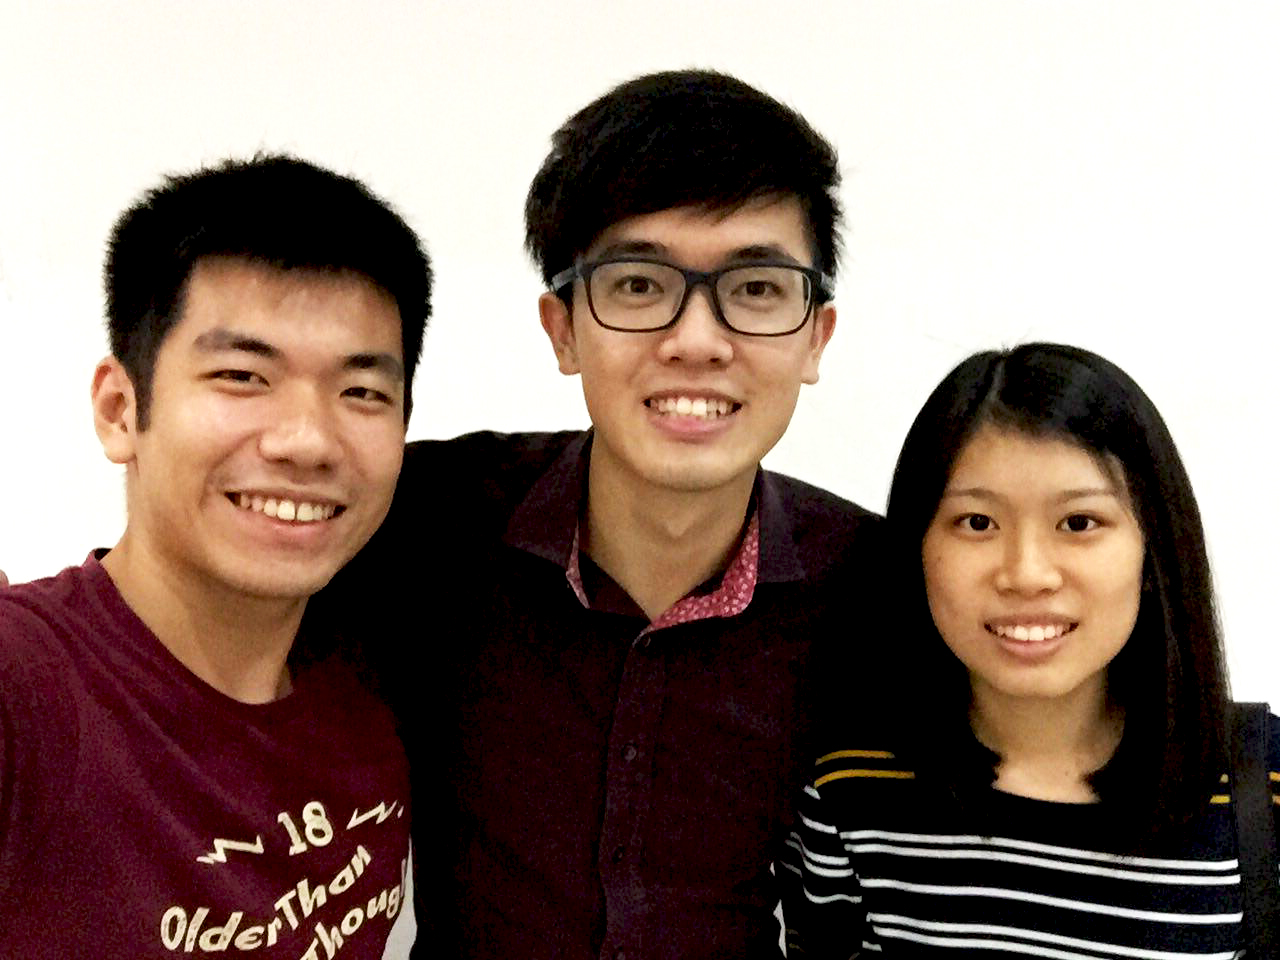 SIS team who developed Chances of Survival app